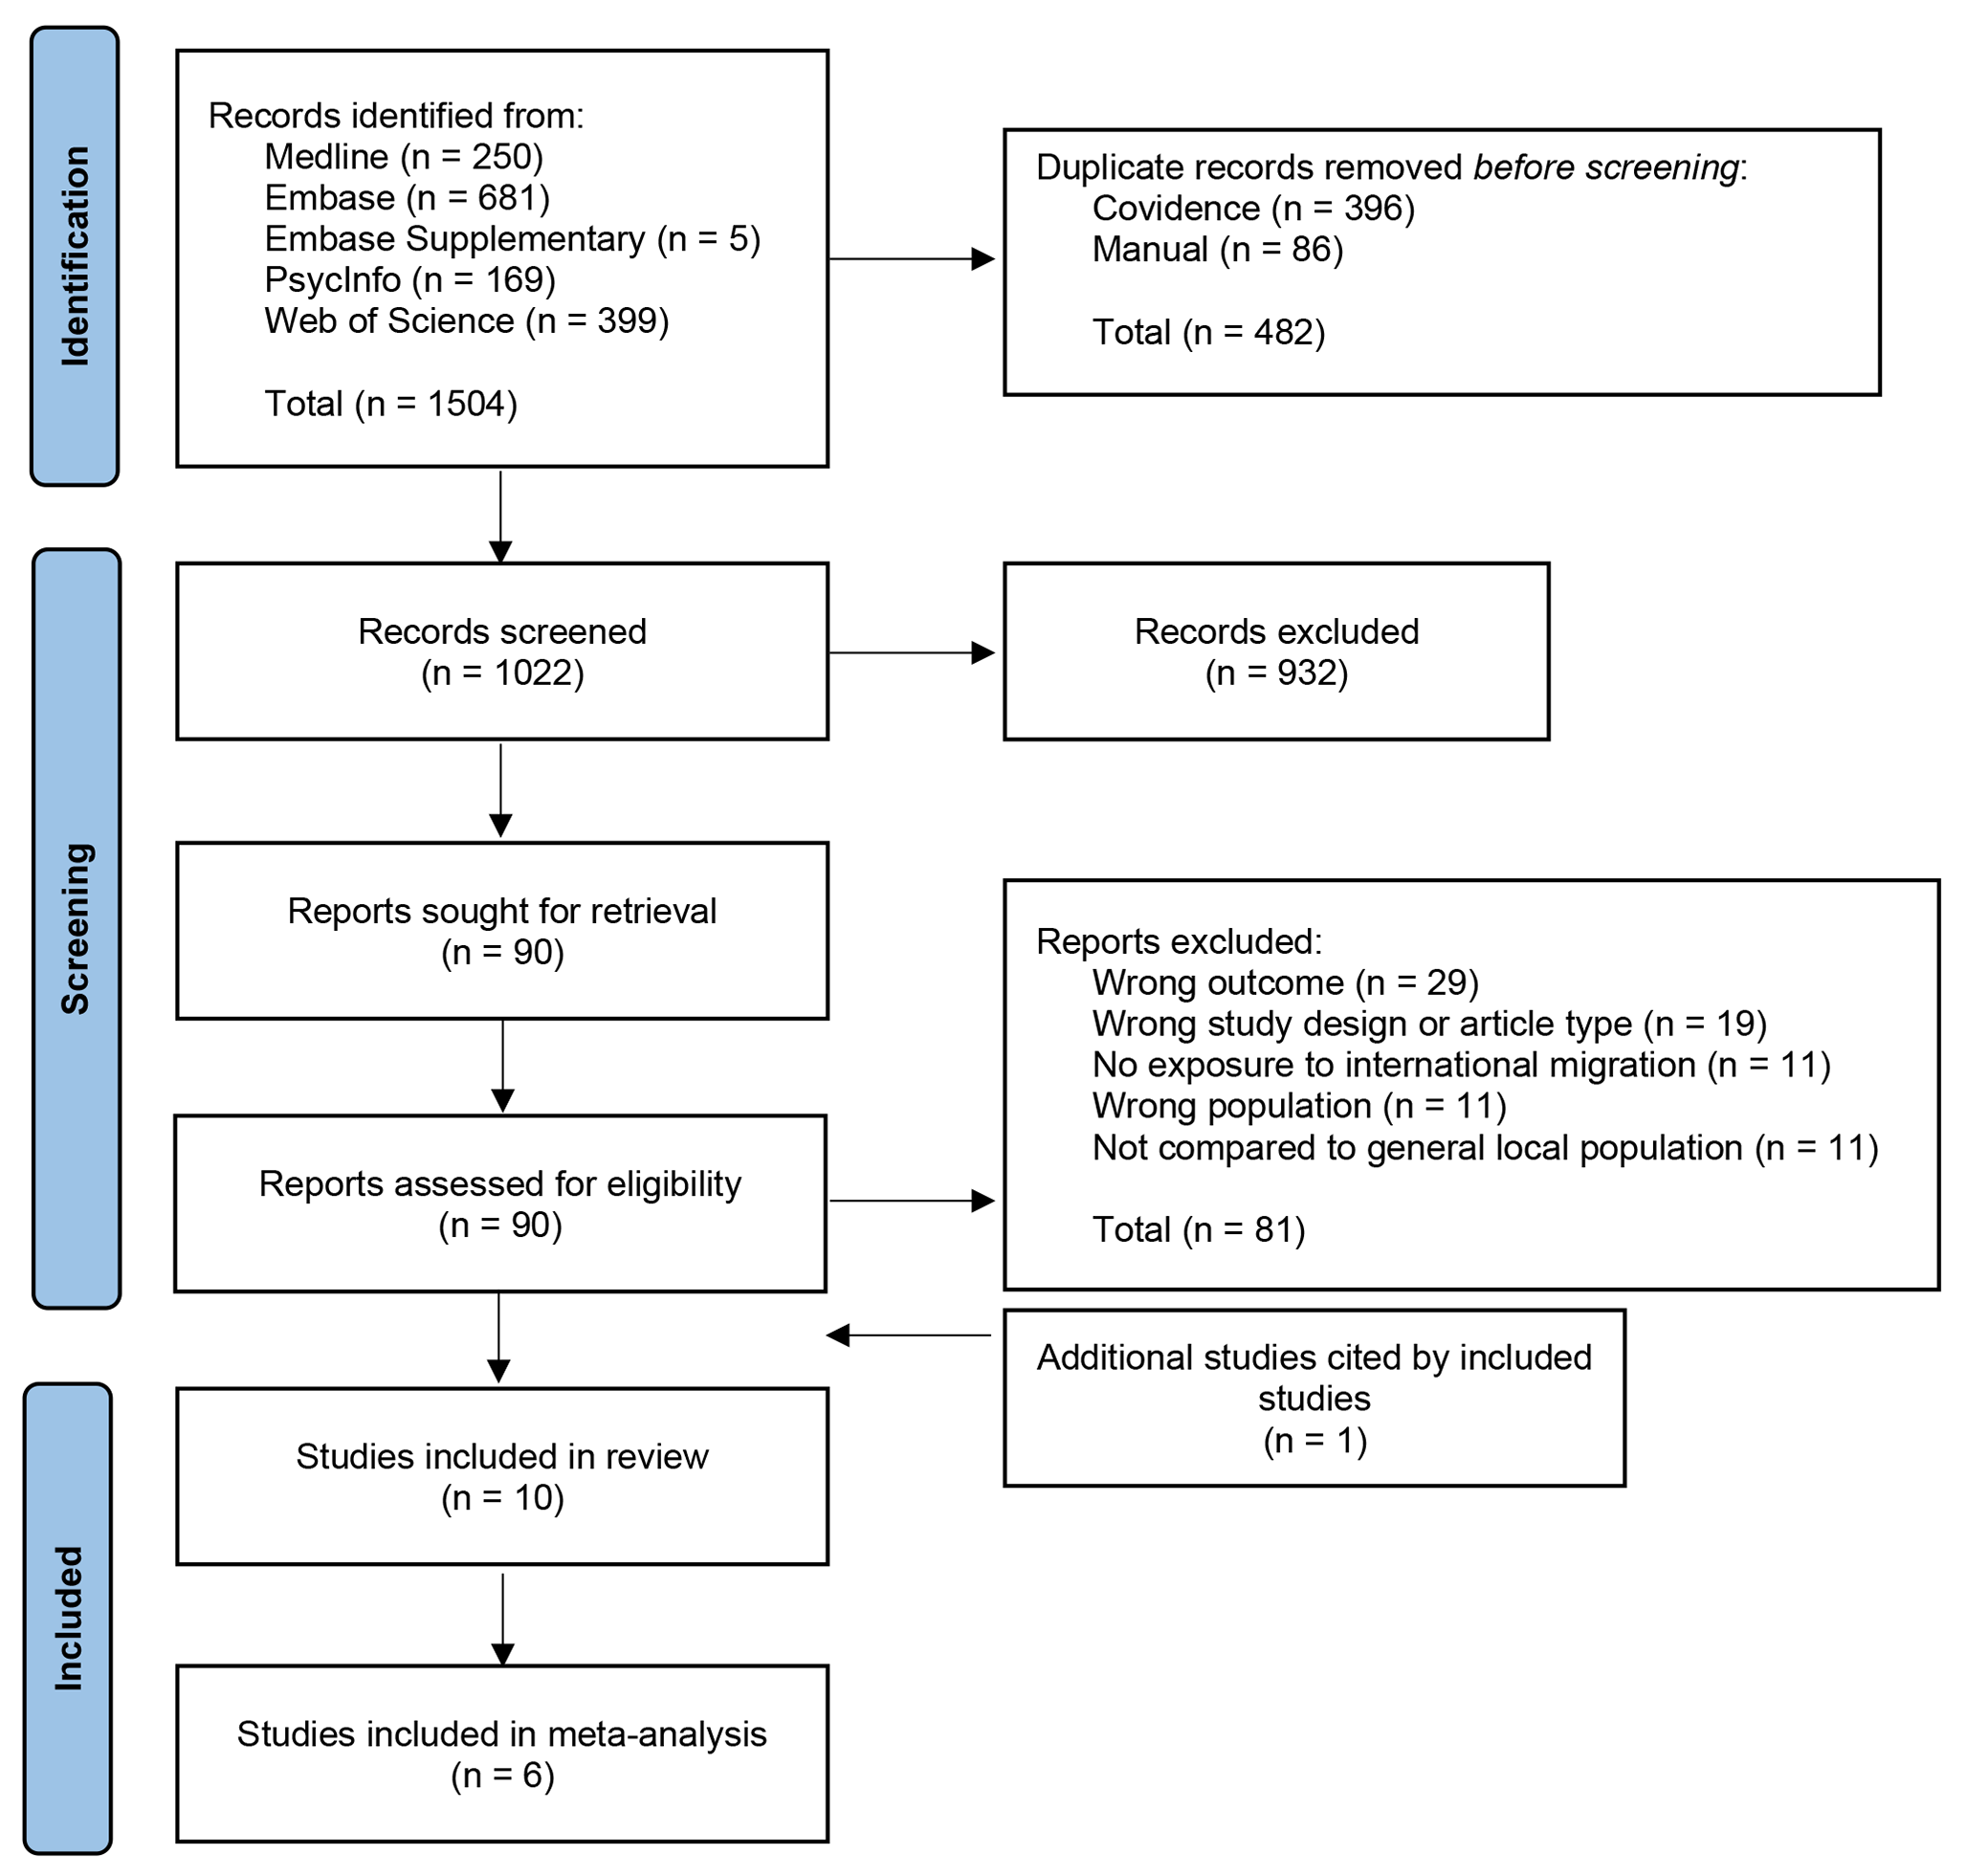 Eating disorders among international migrants: a systematic review and meta-analysis